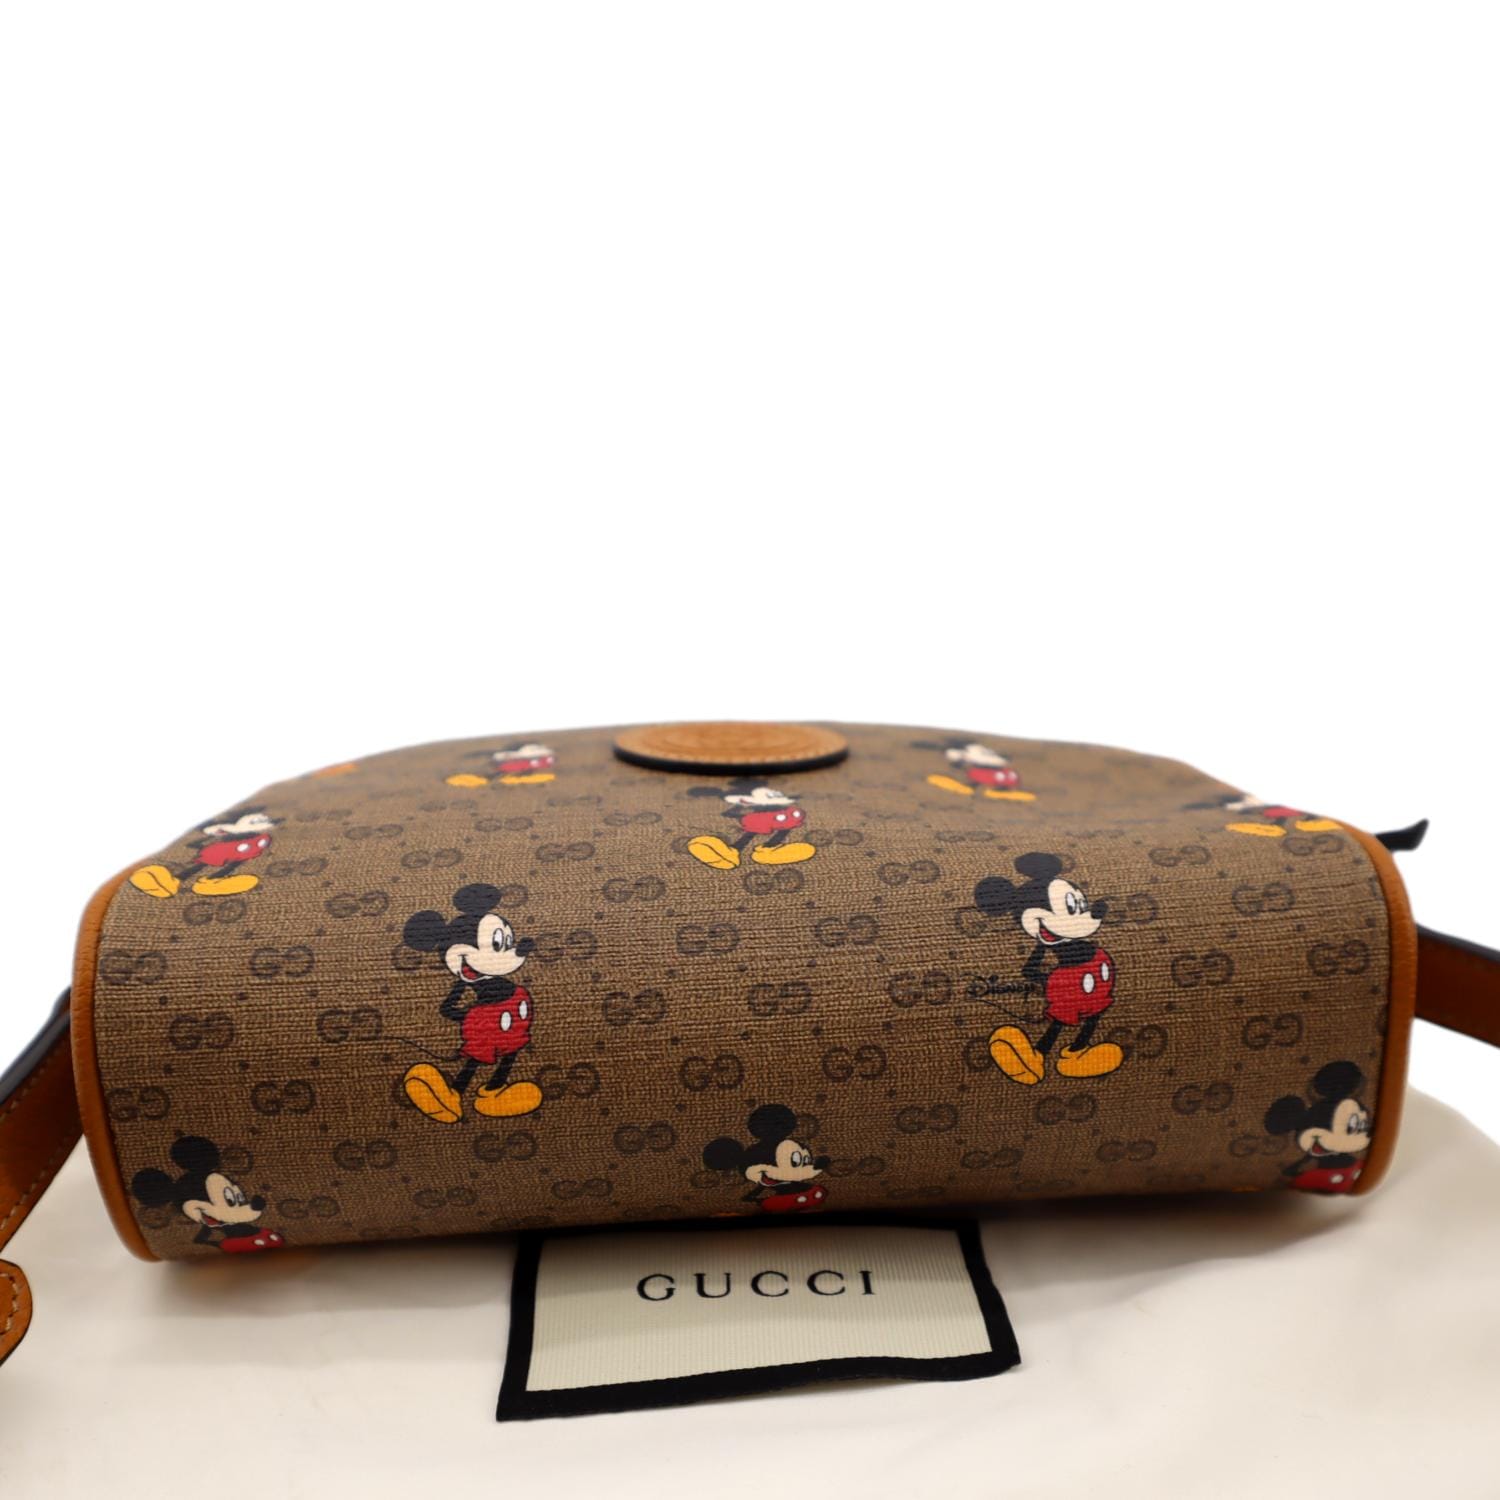 GUCCI x DISNEY Mickey Mouse Print Canvas Leather Saddle Shoulder